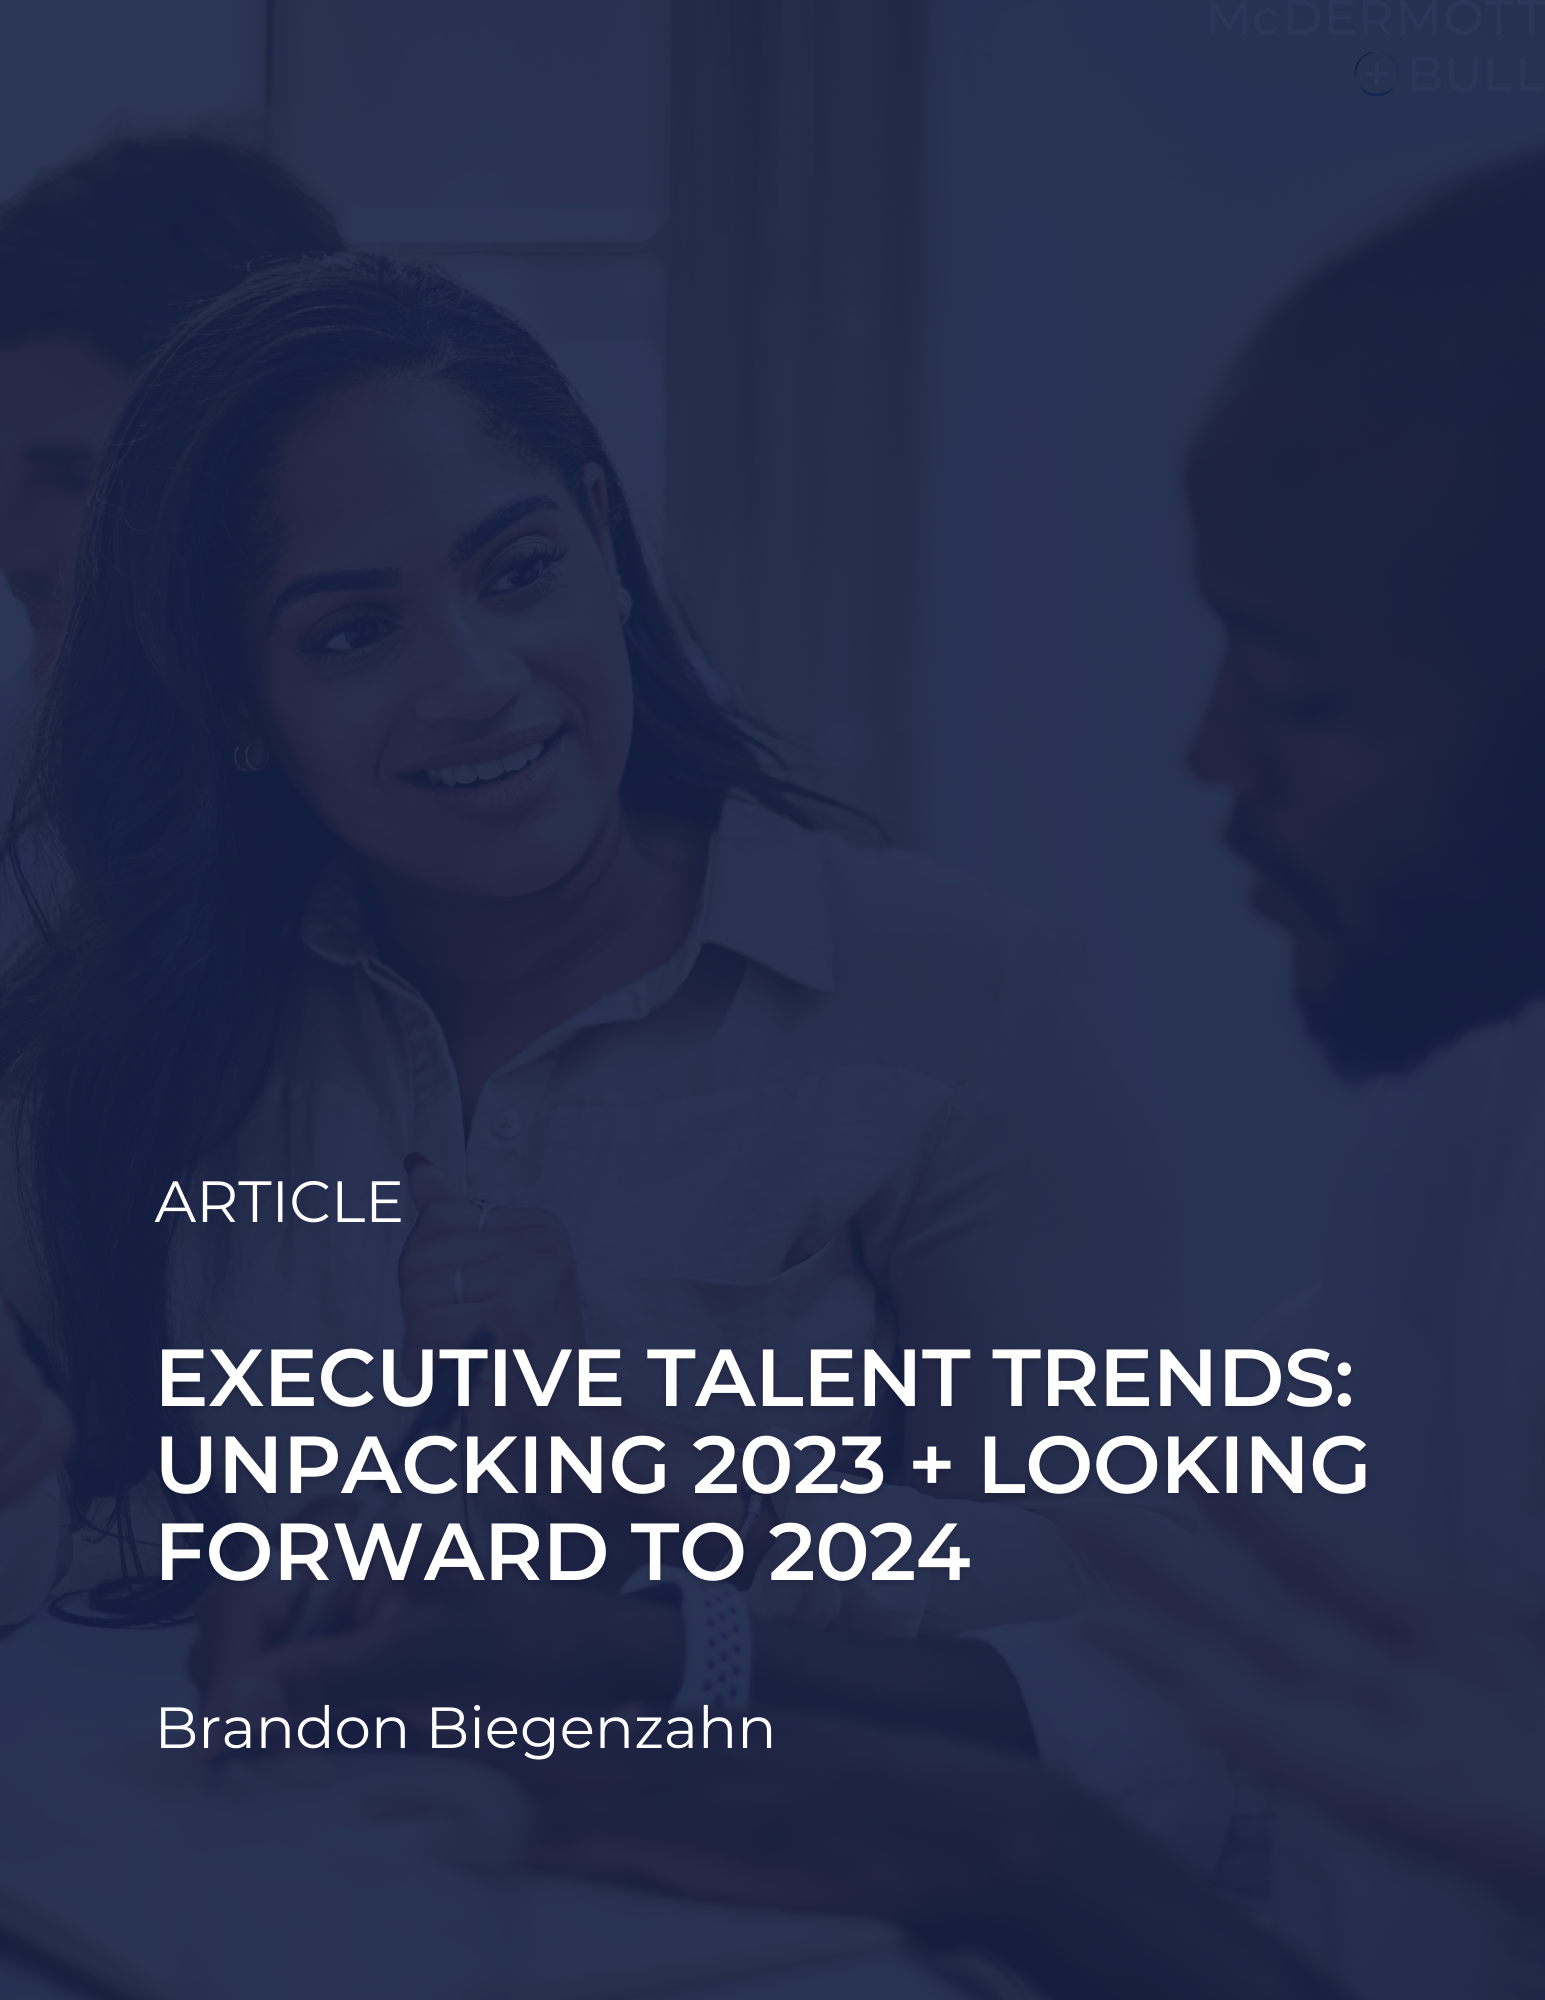 Executive Talent Trends: Unpacking 2023 and Looking Forward to 2024